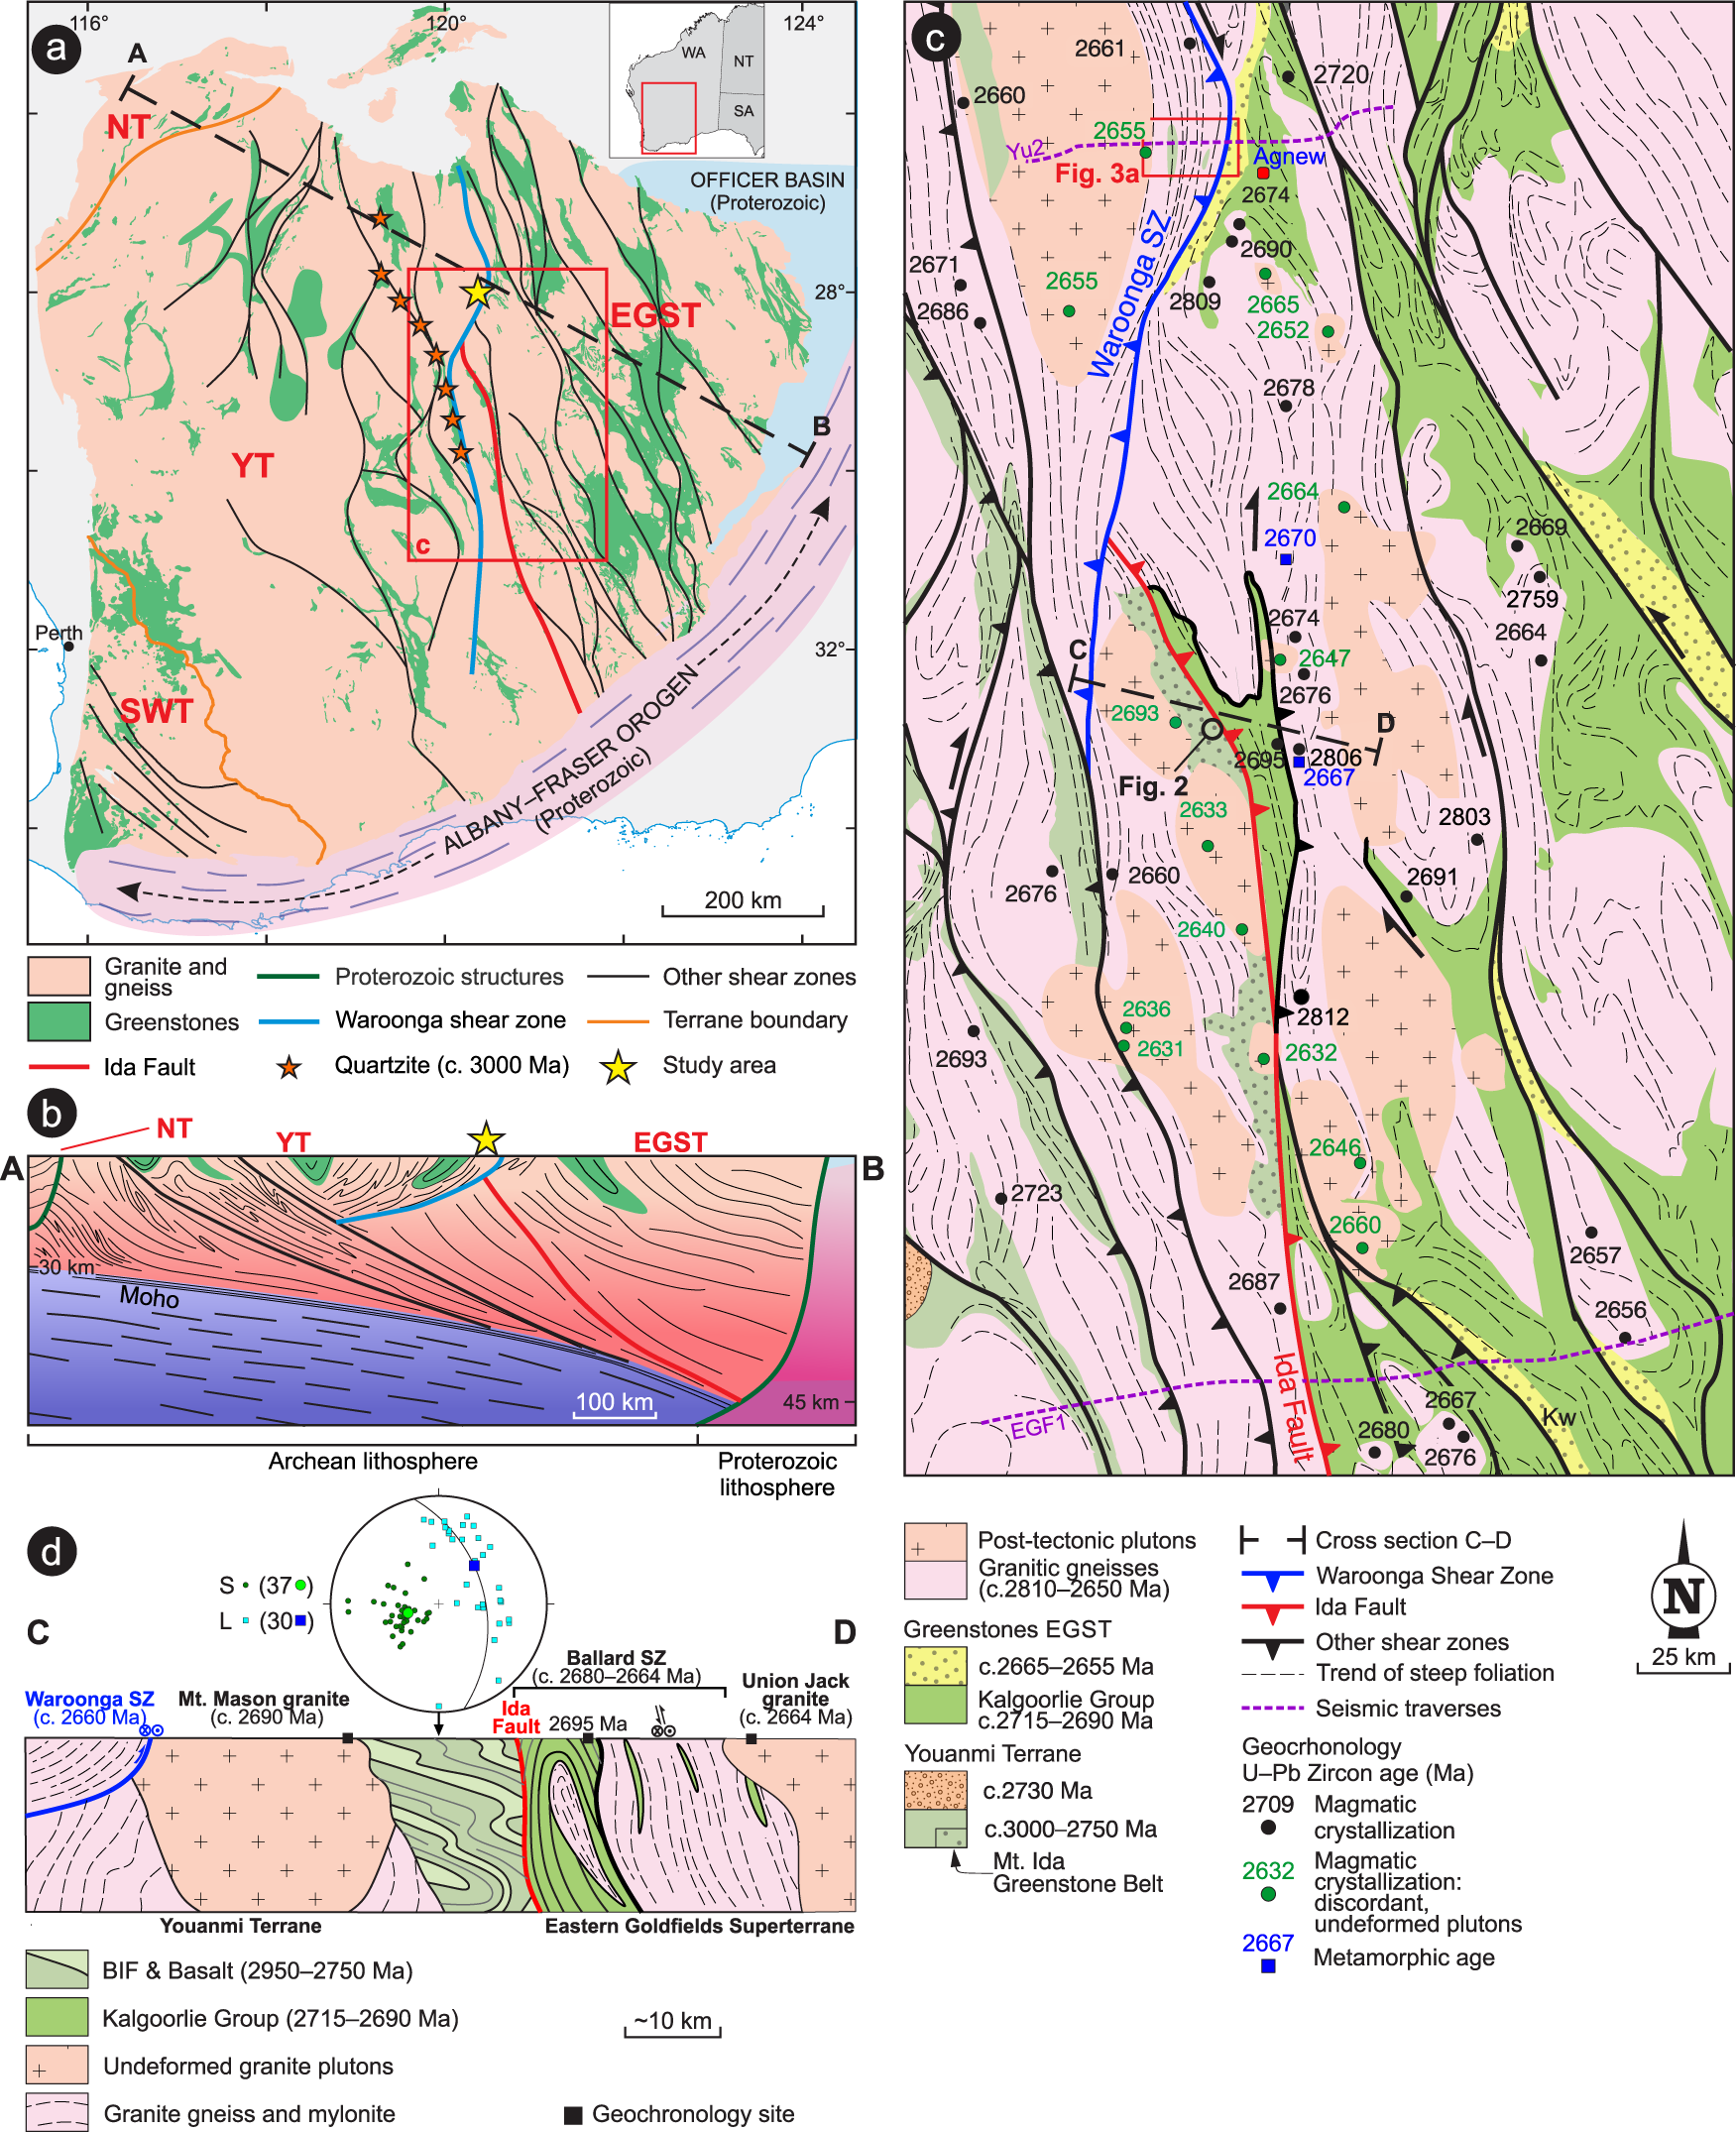 Greenstone burial–exhumation cycles at the late Archean transition to plate  tectonics | Nature Communications